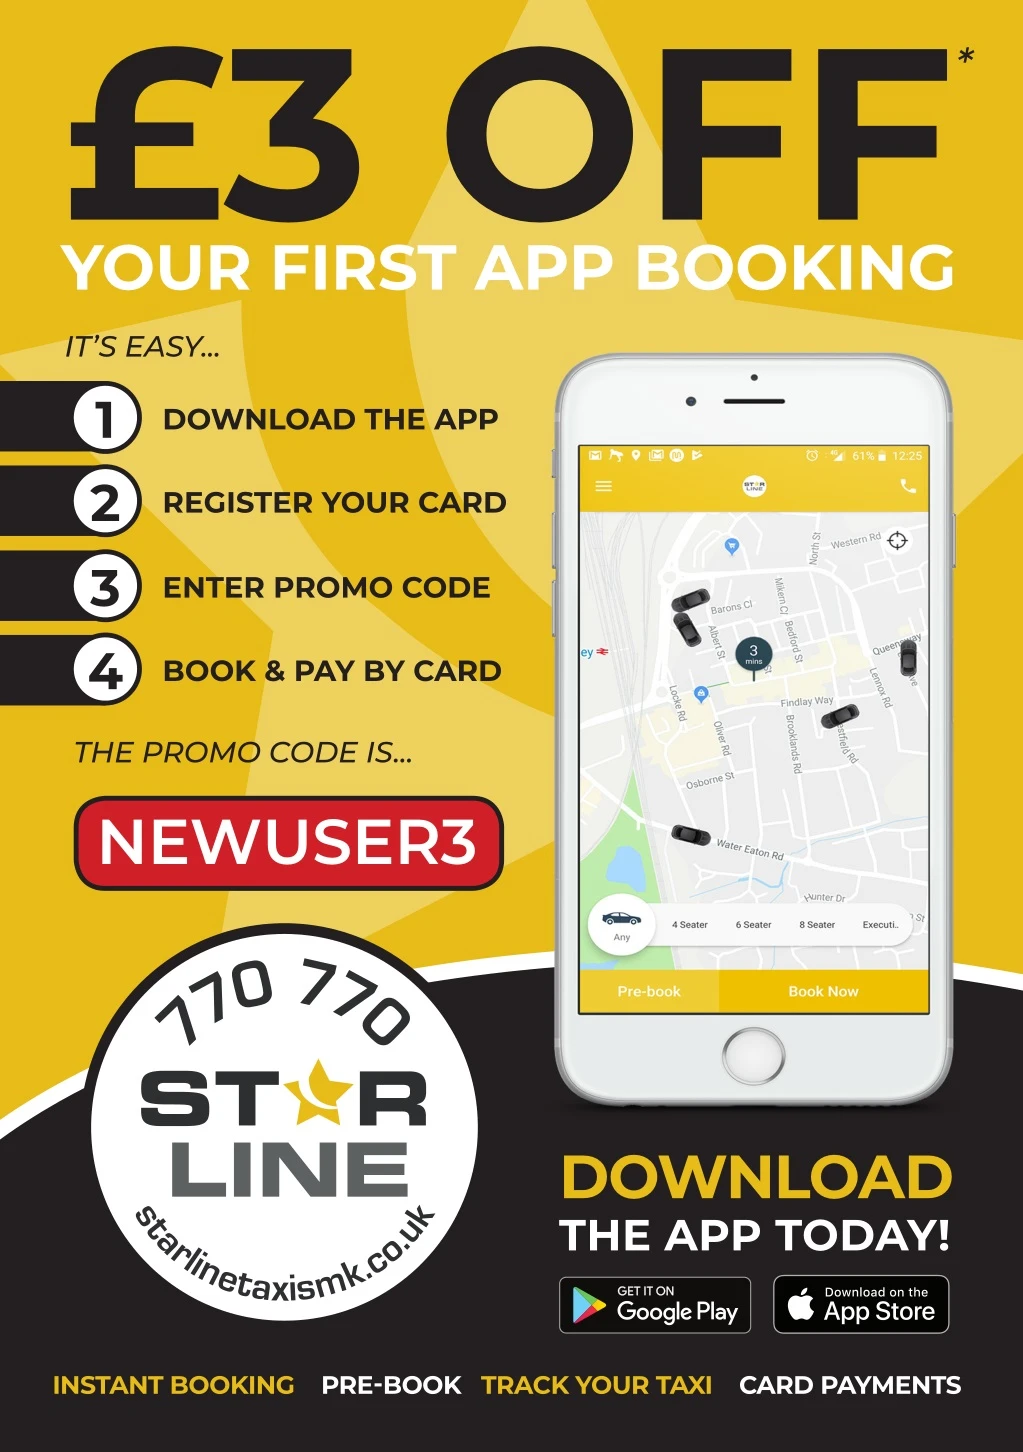 3 off your first app booking